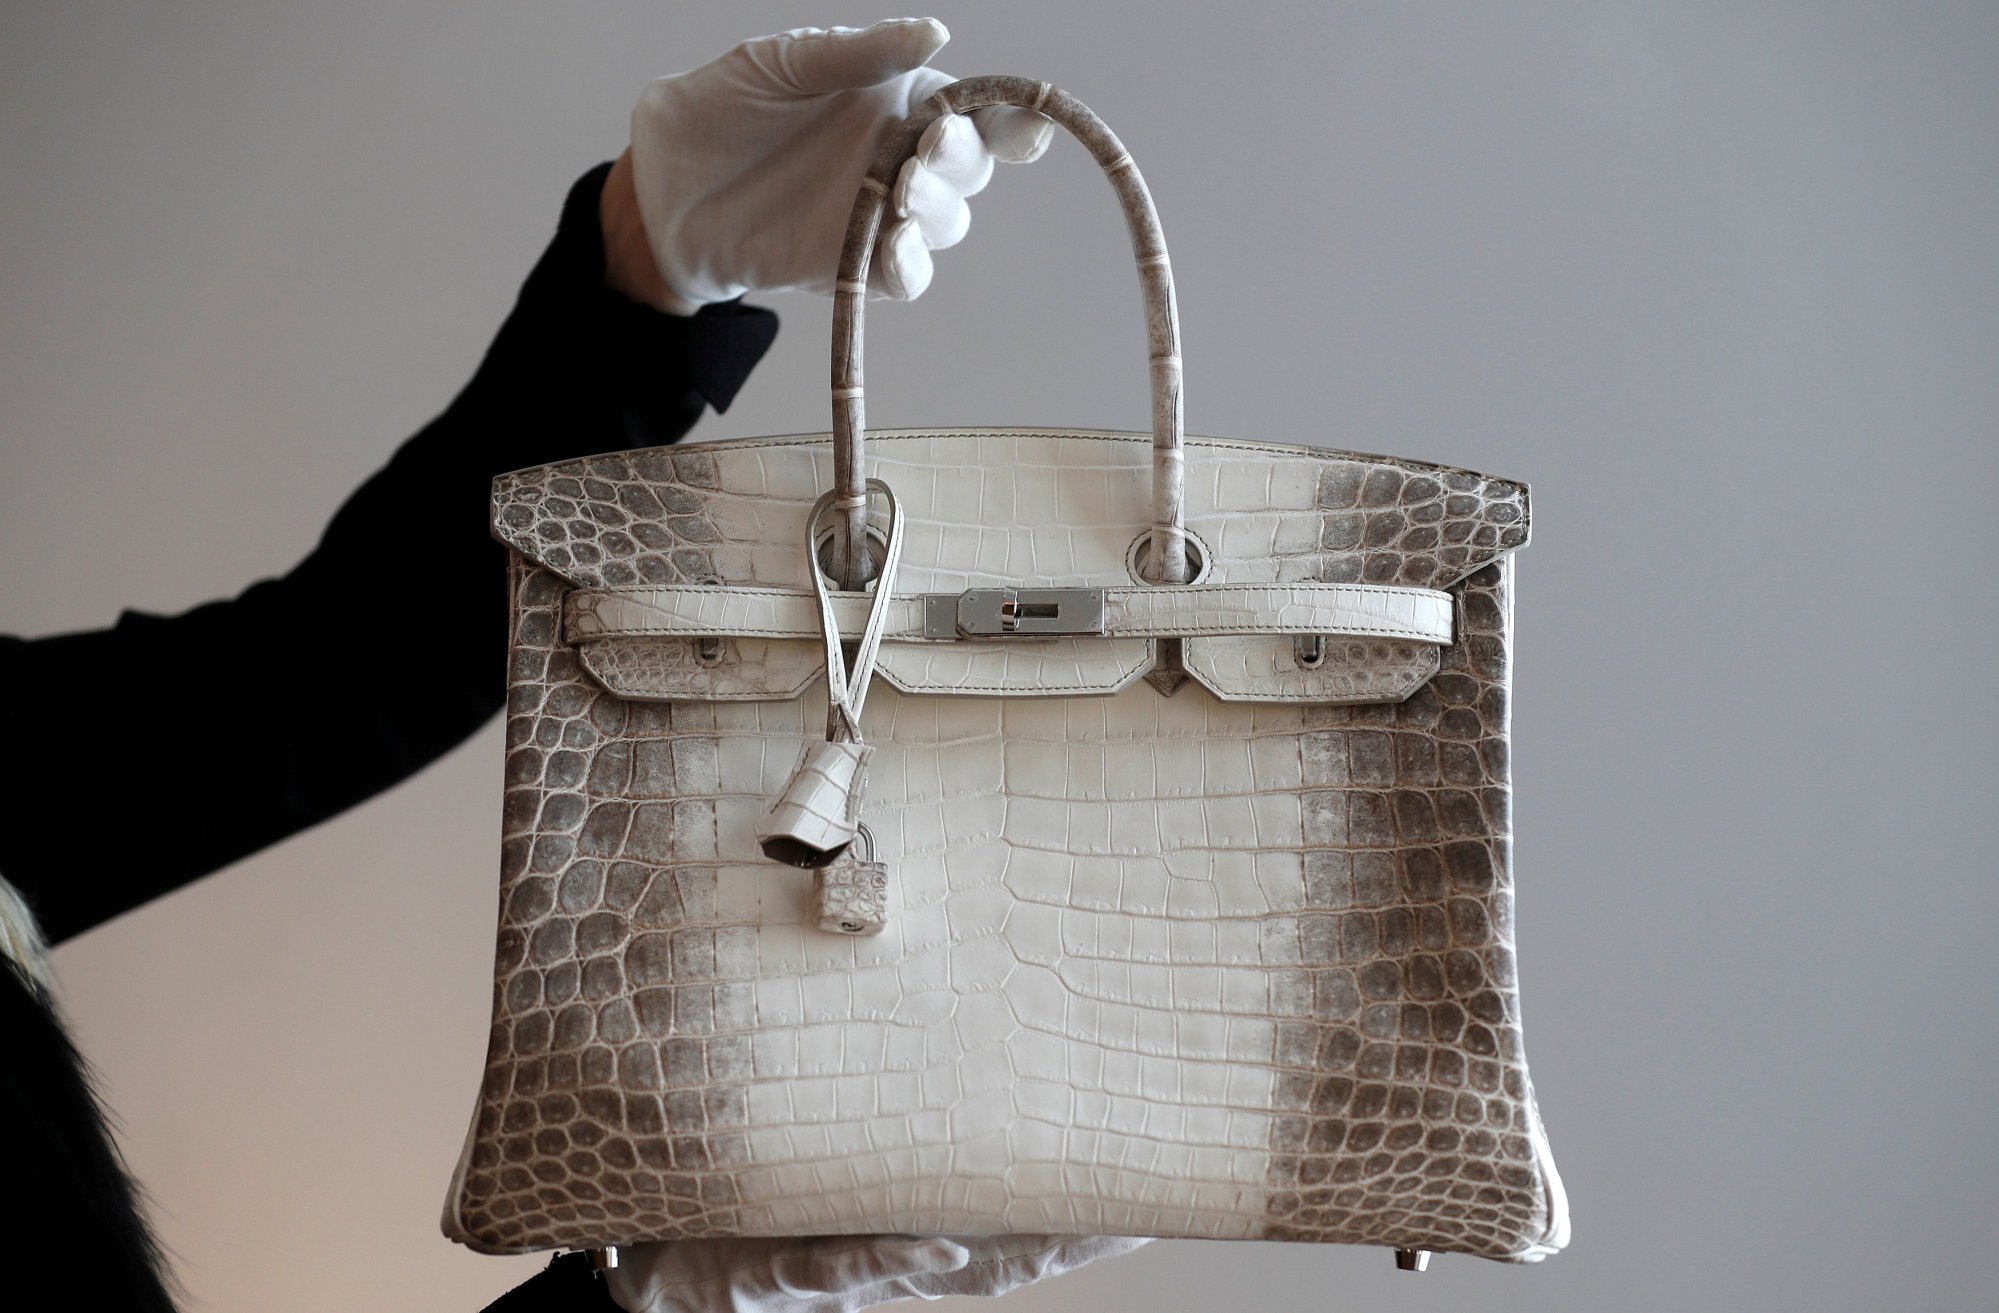 LVMH creates blockchain technology to track luxury goods and fight fakes